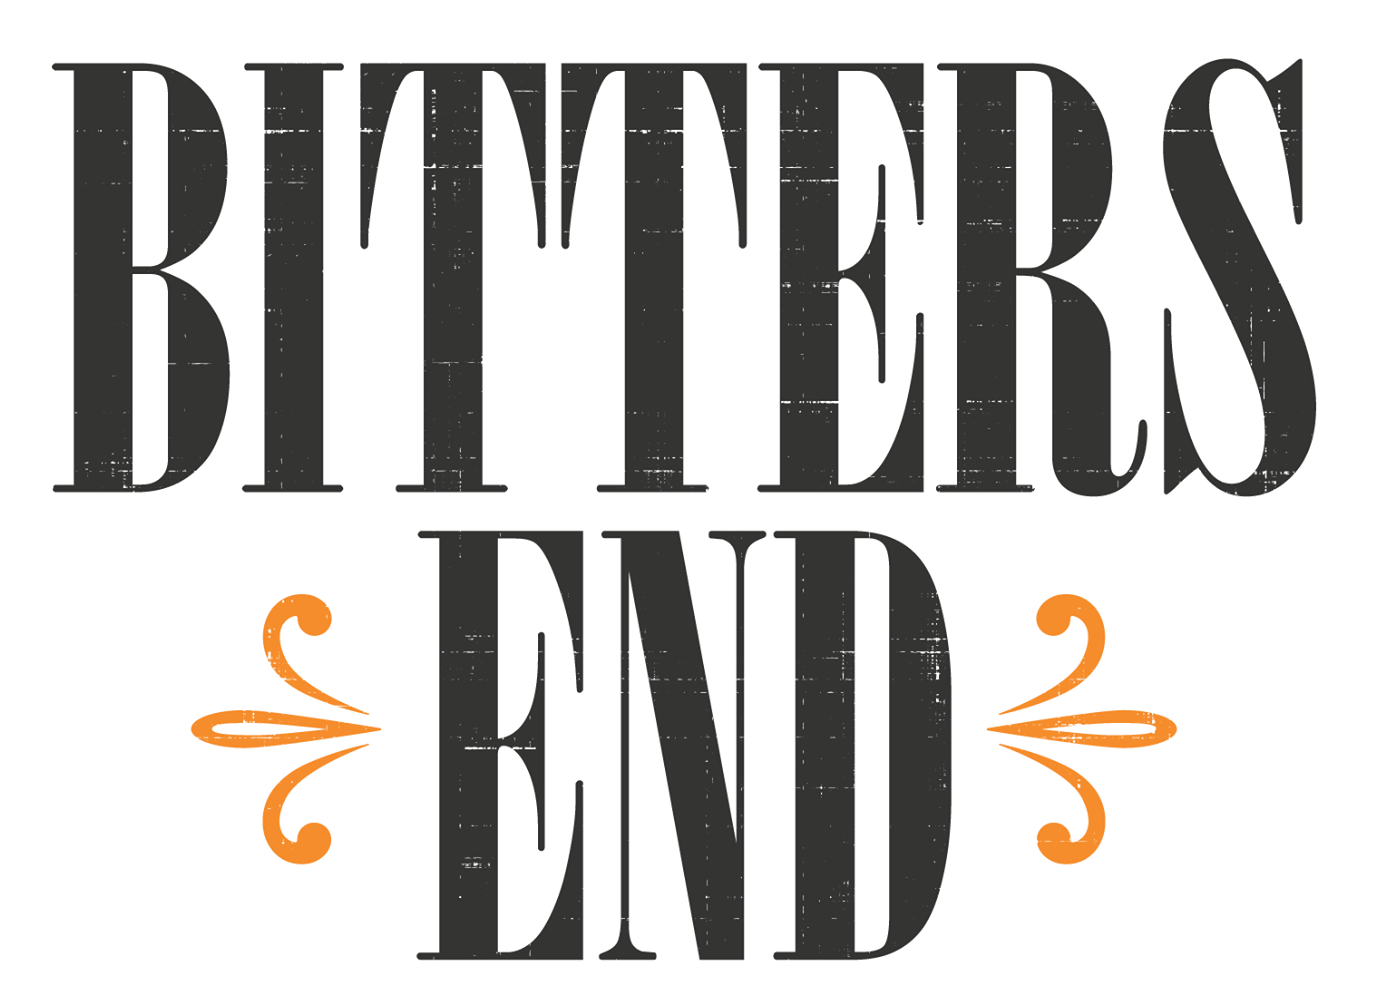 Logo for Bitters End